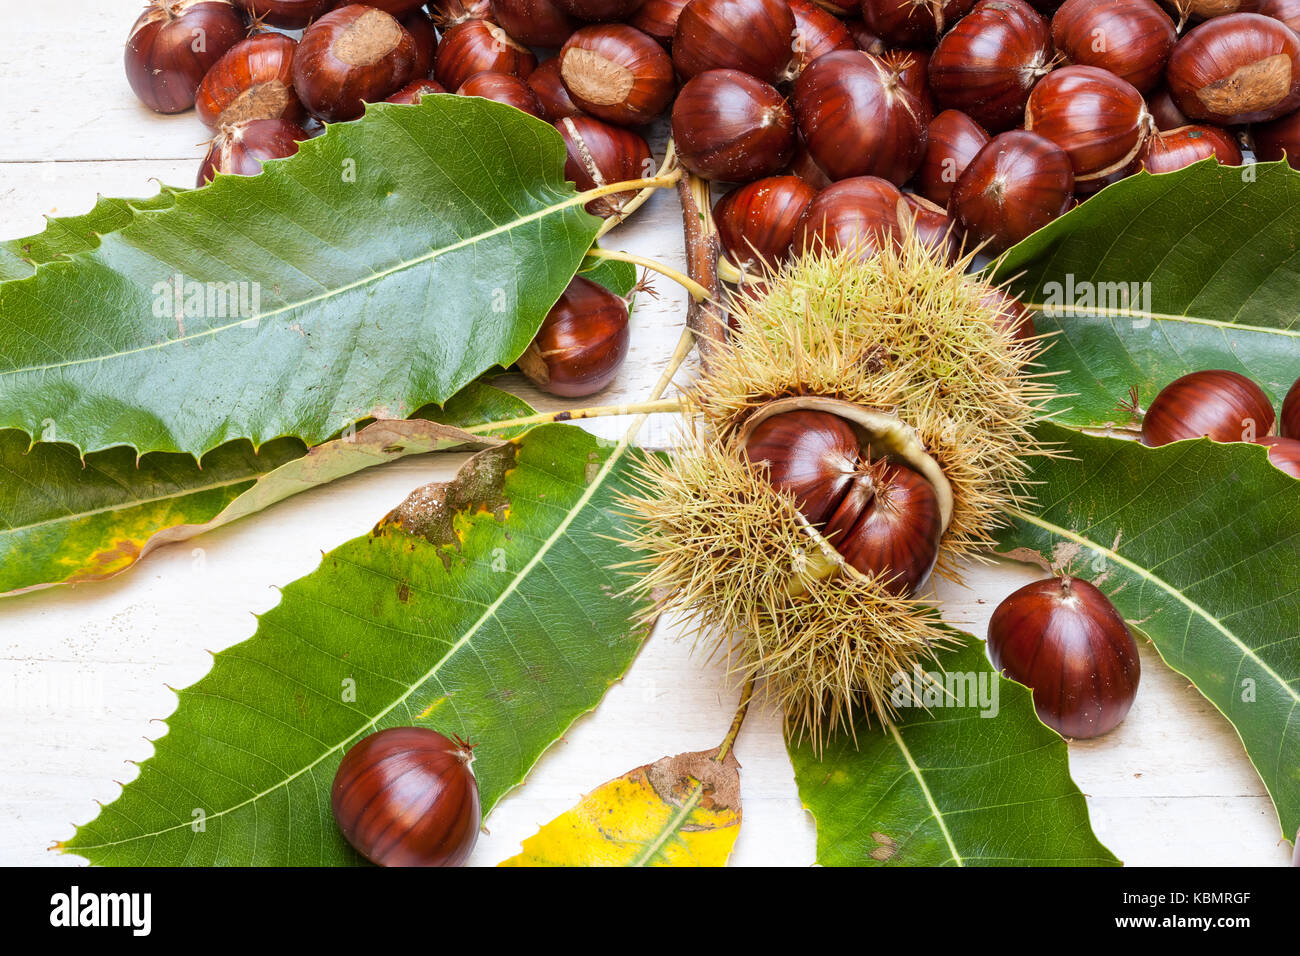 There are chestnuts on a leaf of a pine tree Stock Photo